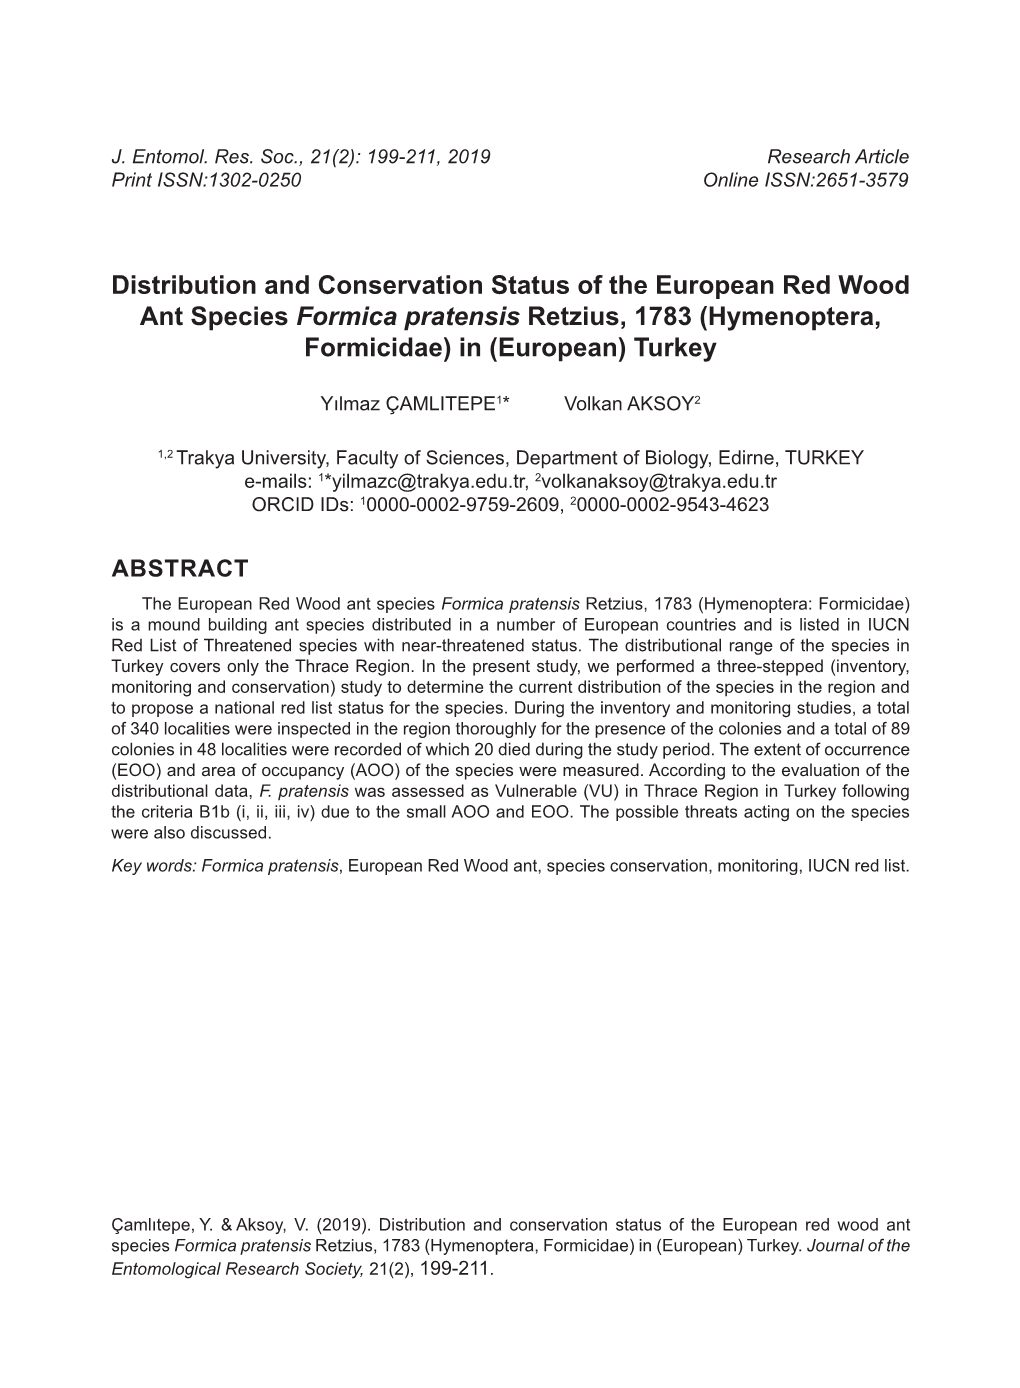 Distribution and Conservation Status of the European Red Wood Ant Species Formica Pratensis Retzius, 1783 (Hymenoptera, Formicidae) in (European) Turkey